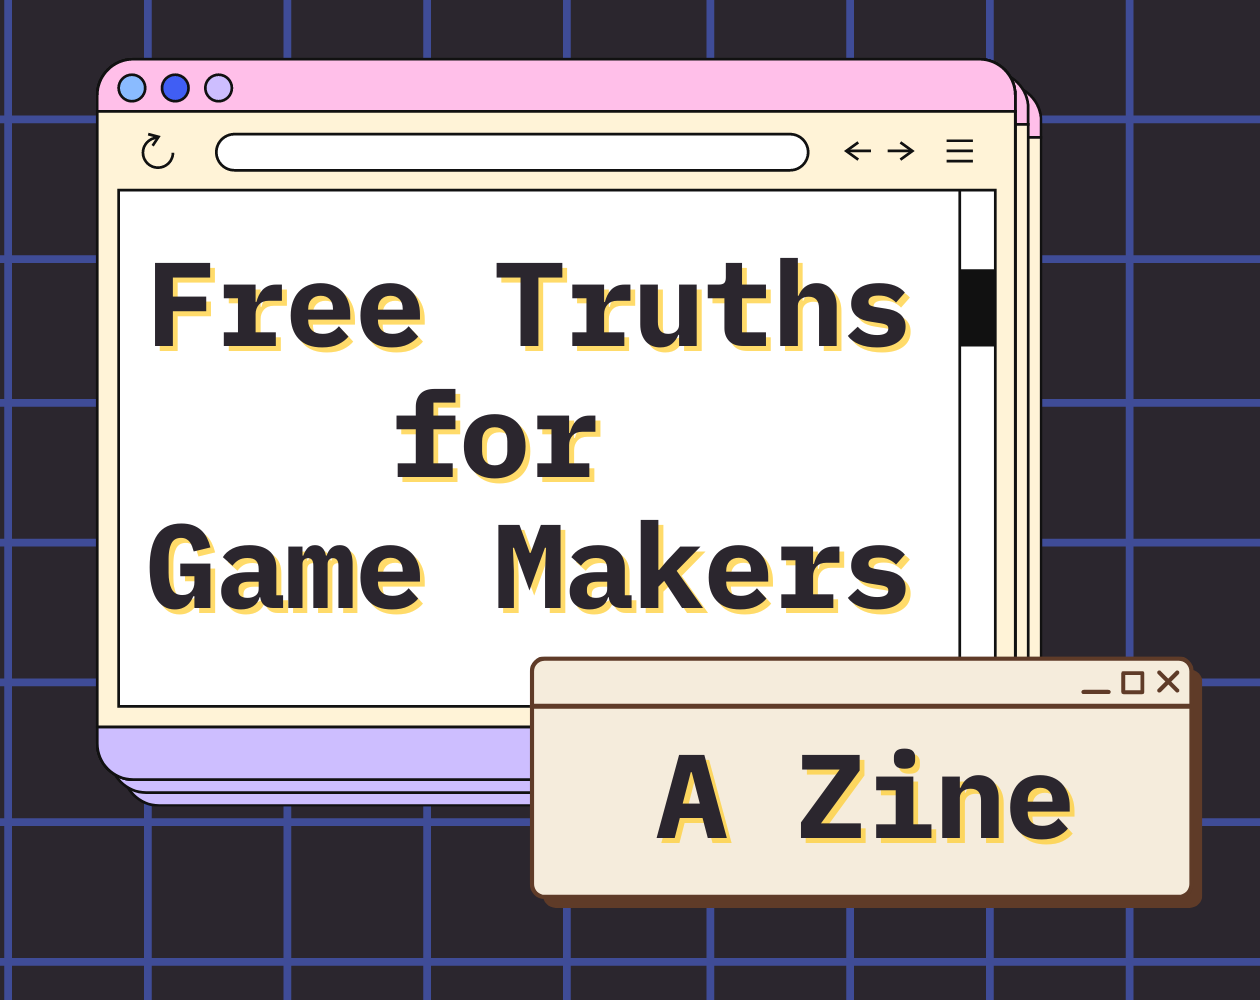 Free Truths for Game Makers